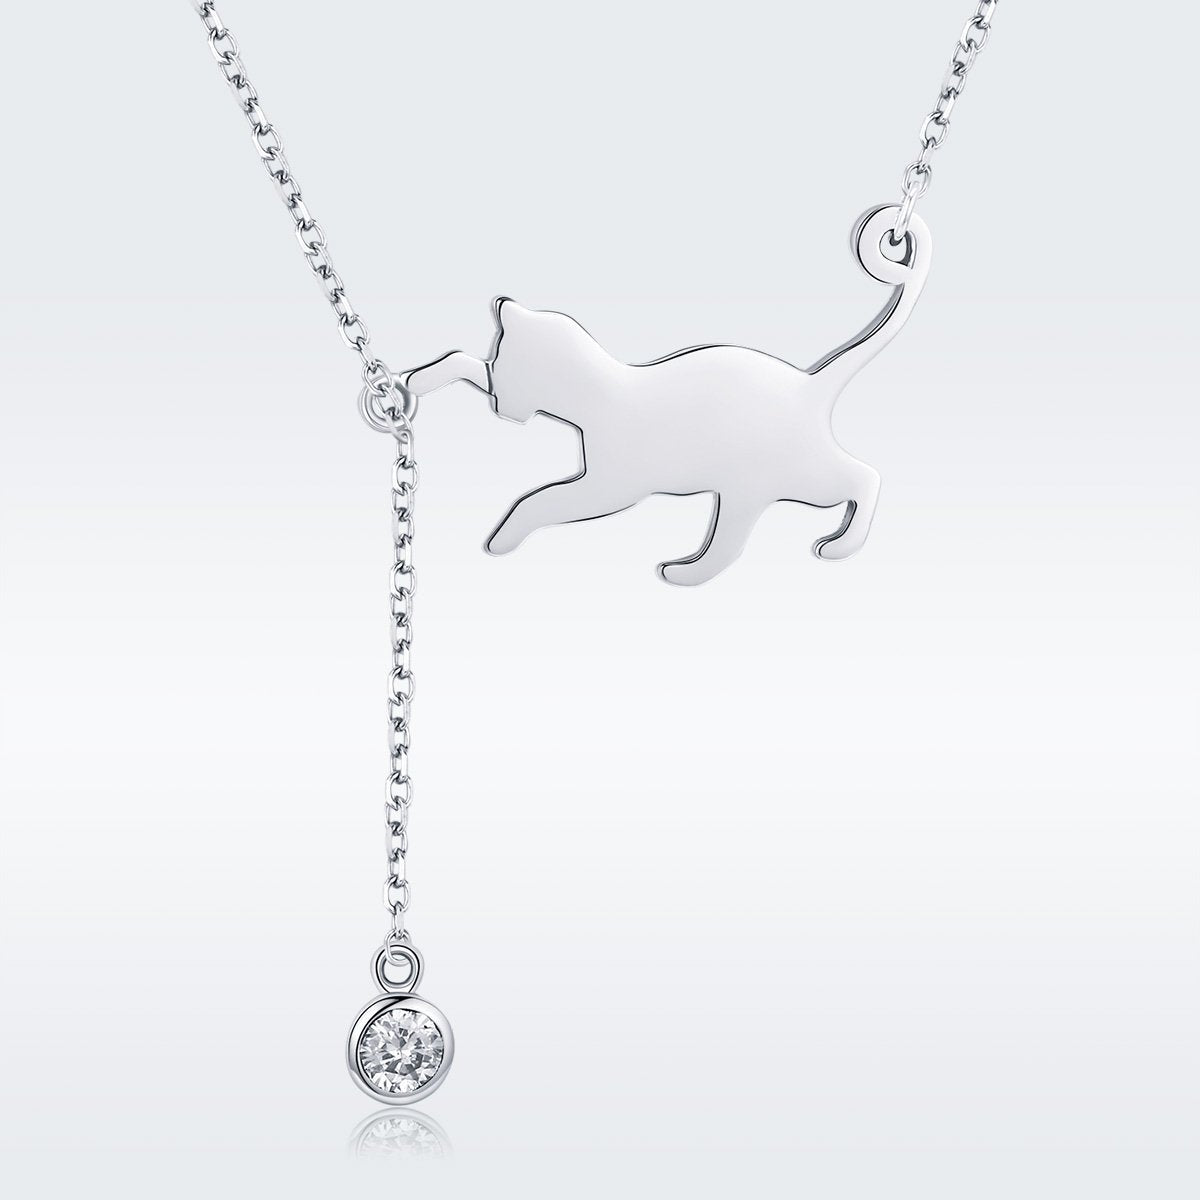 Elegant Playful Cat 925 Sterling Silver Necklace - Aisllin Jewelry